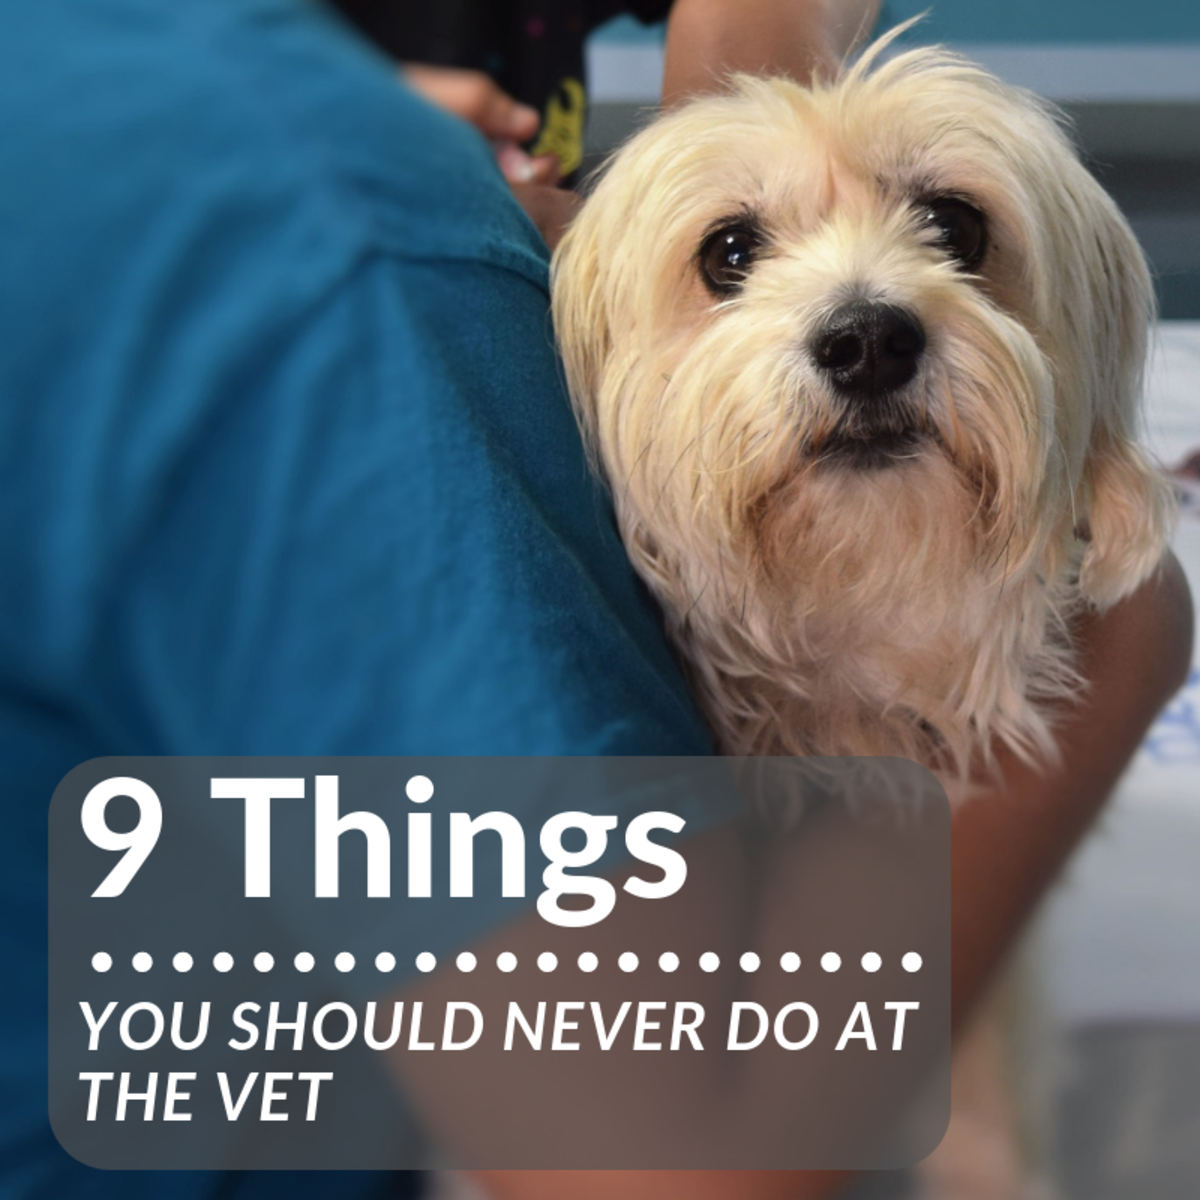 If you want the best care possible for your furry companion, here are 9 behaviors you should avoid when visiting your veterinarian's office. 